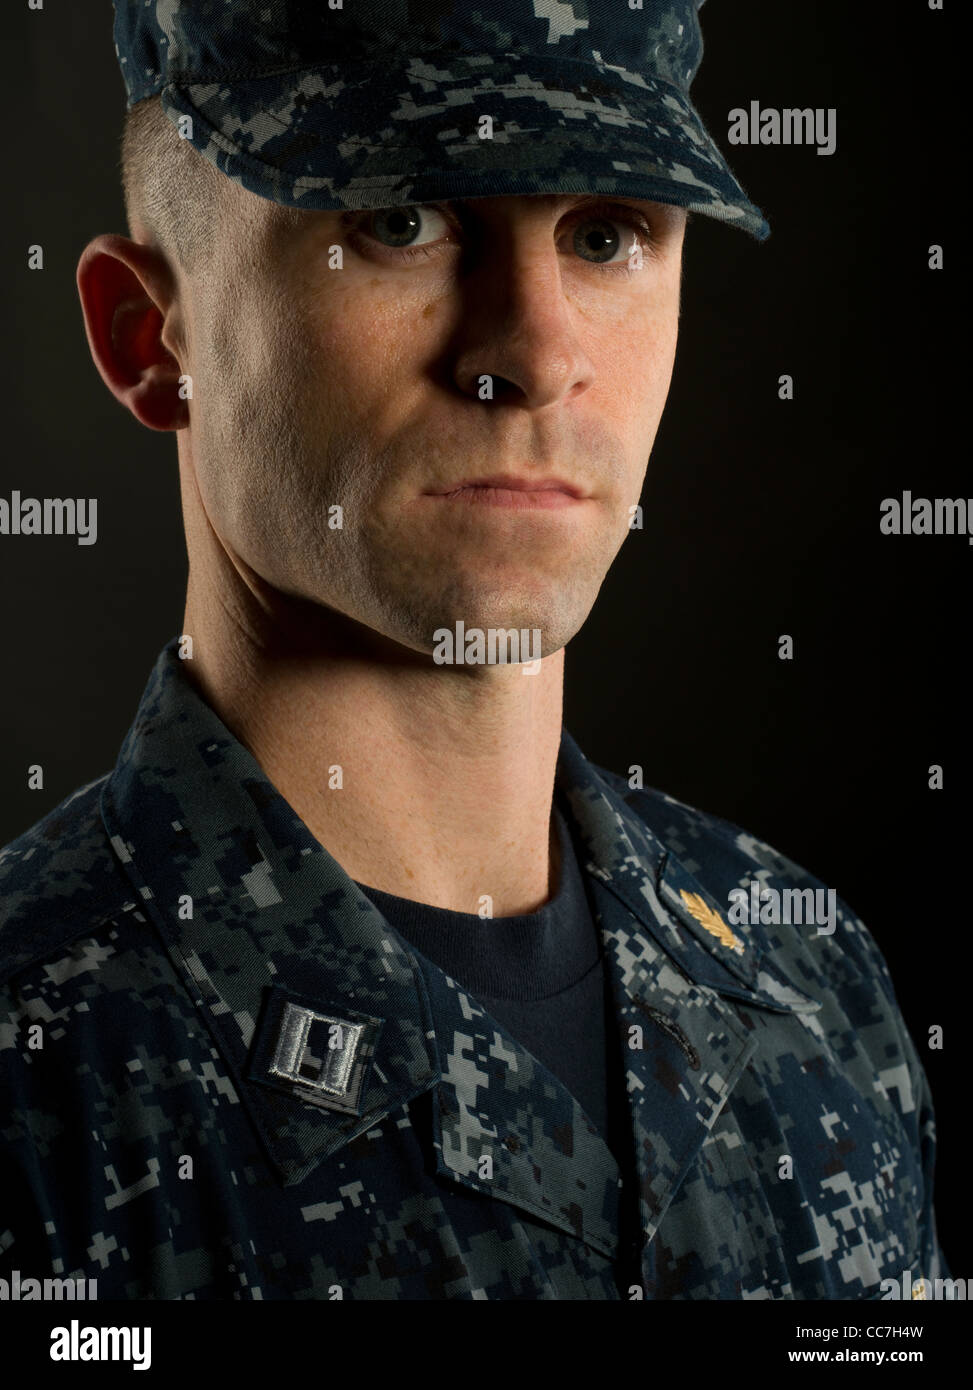 United States Navy Officer in Navy Working Uniform Stock Photo - Alamy